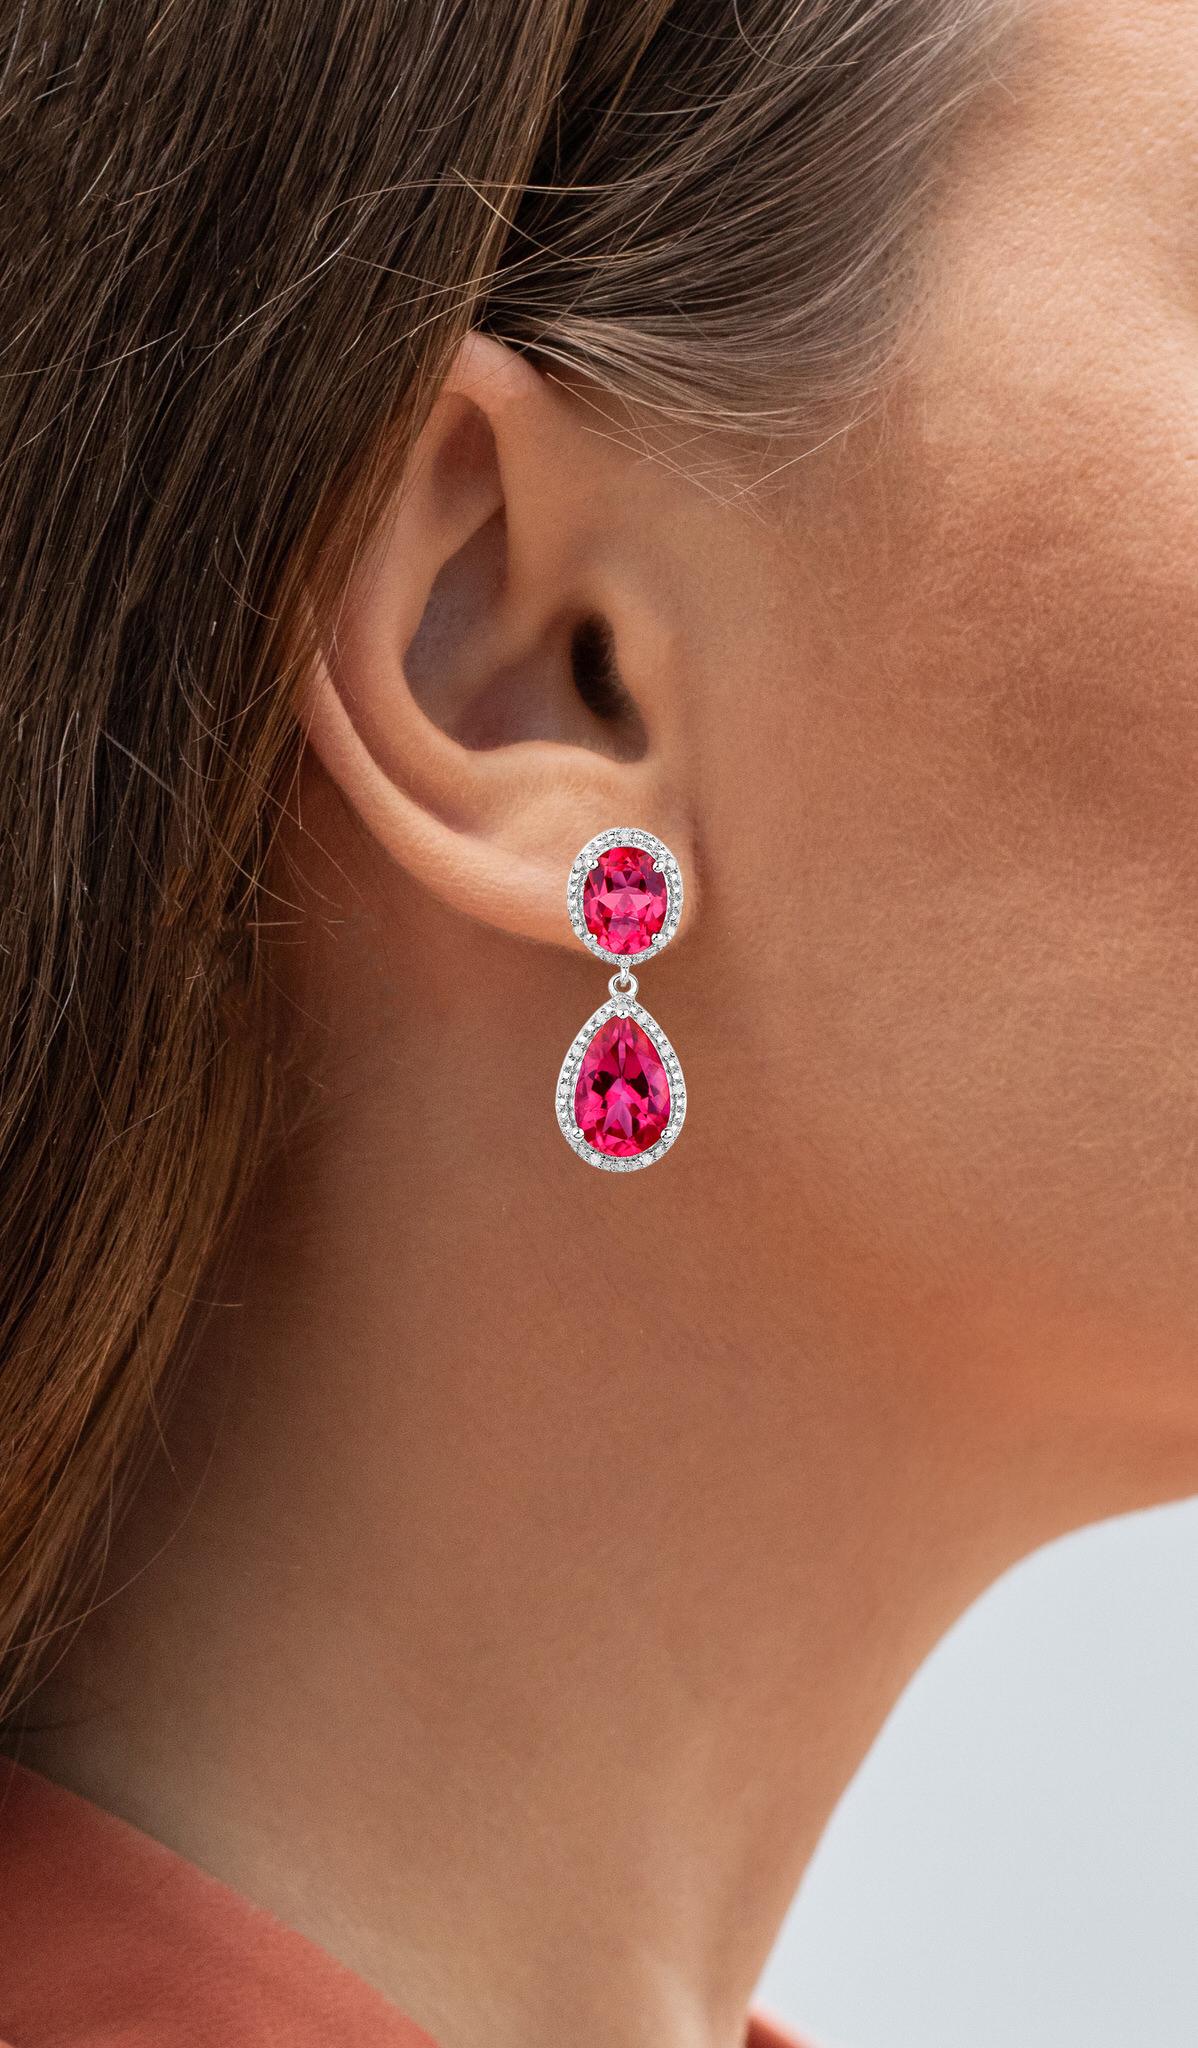 Contemporary Hot Pink Topaz Earrings Diamond Setting 11.35 Carats Total